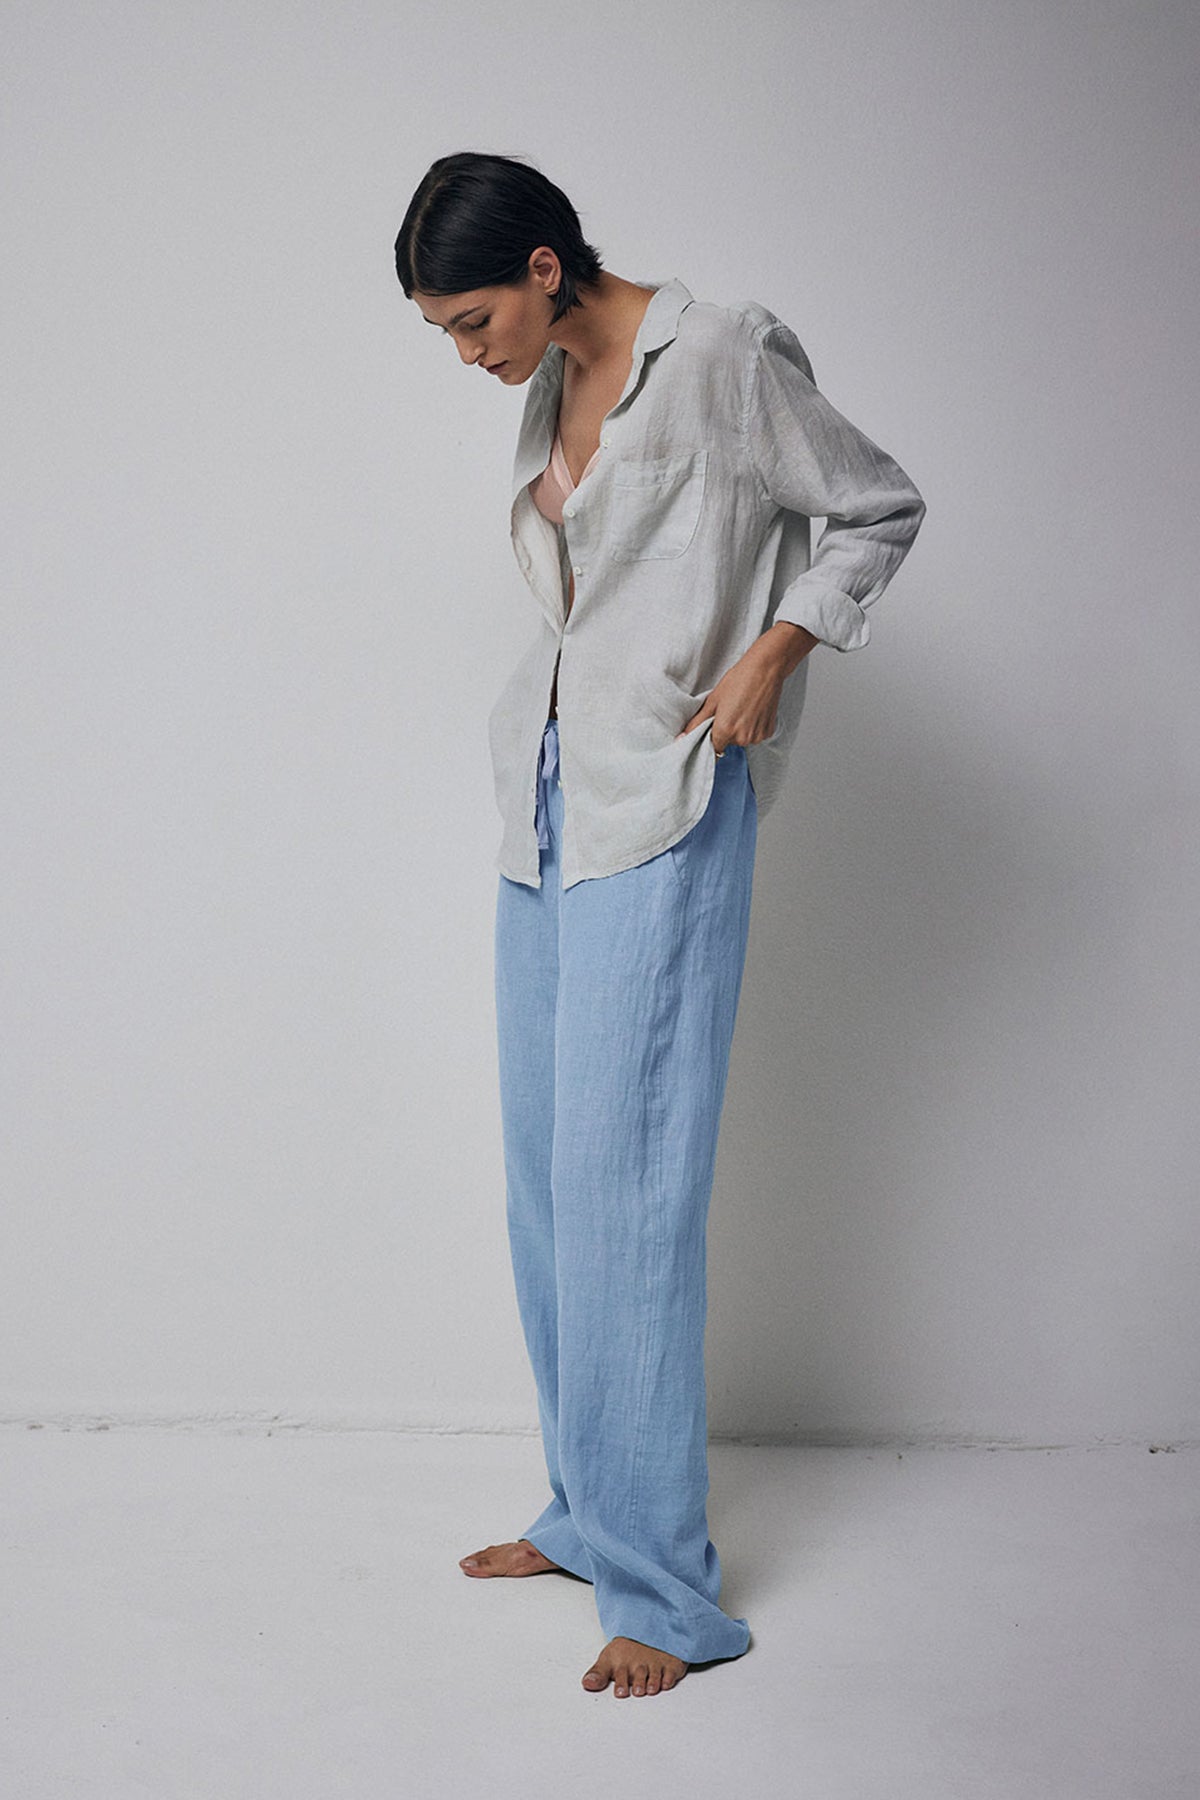 A person wearing a casual, unbuttoned light grey shirt and Velvet by Jenny Graham PICO LINEN PANT, standing barefoot with a hand on the hip in a white studio setting.-36212496859329